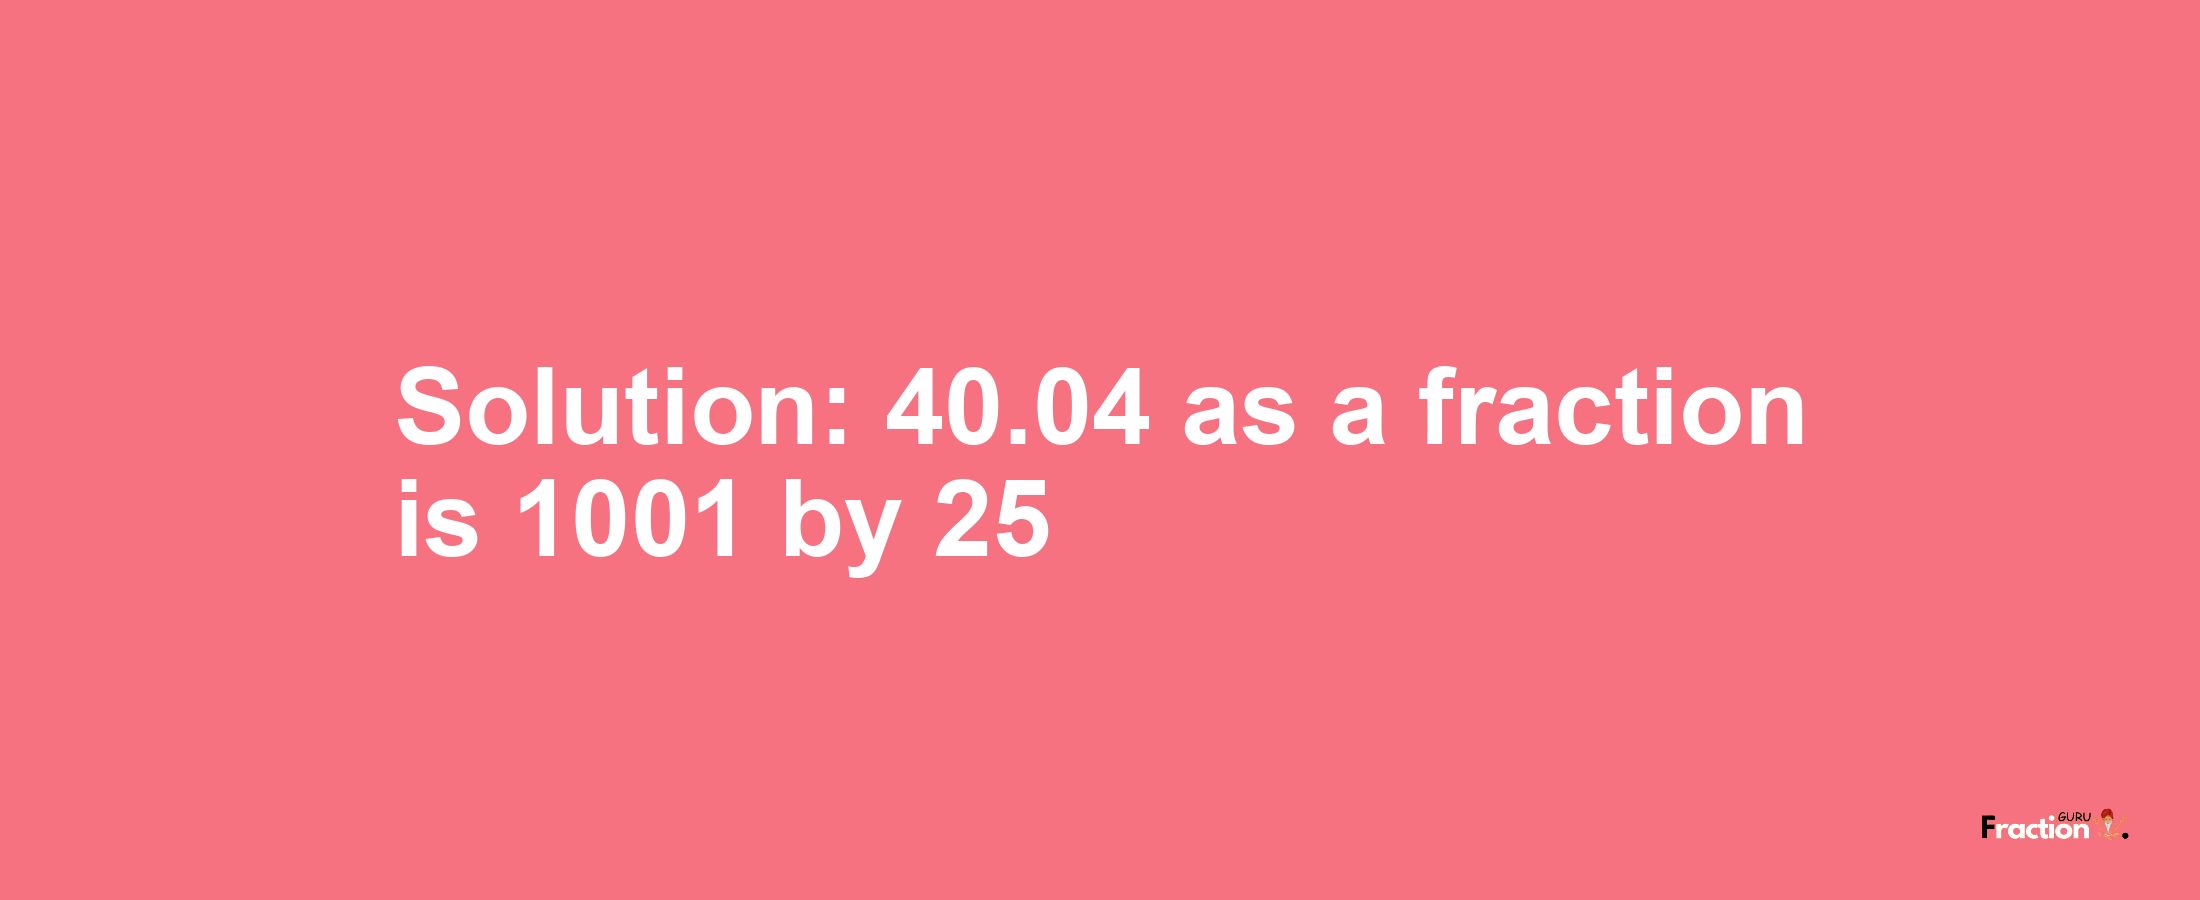 Solution:40.04 as a fraction is 1001/25